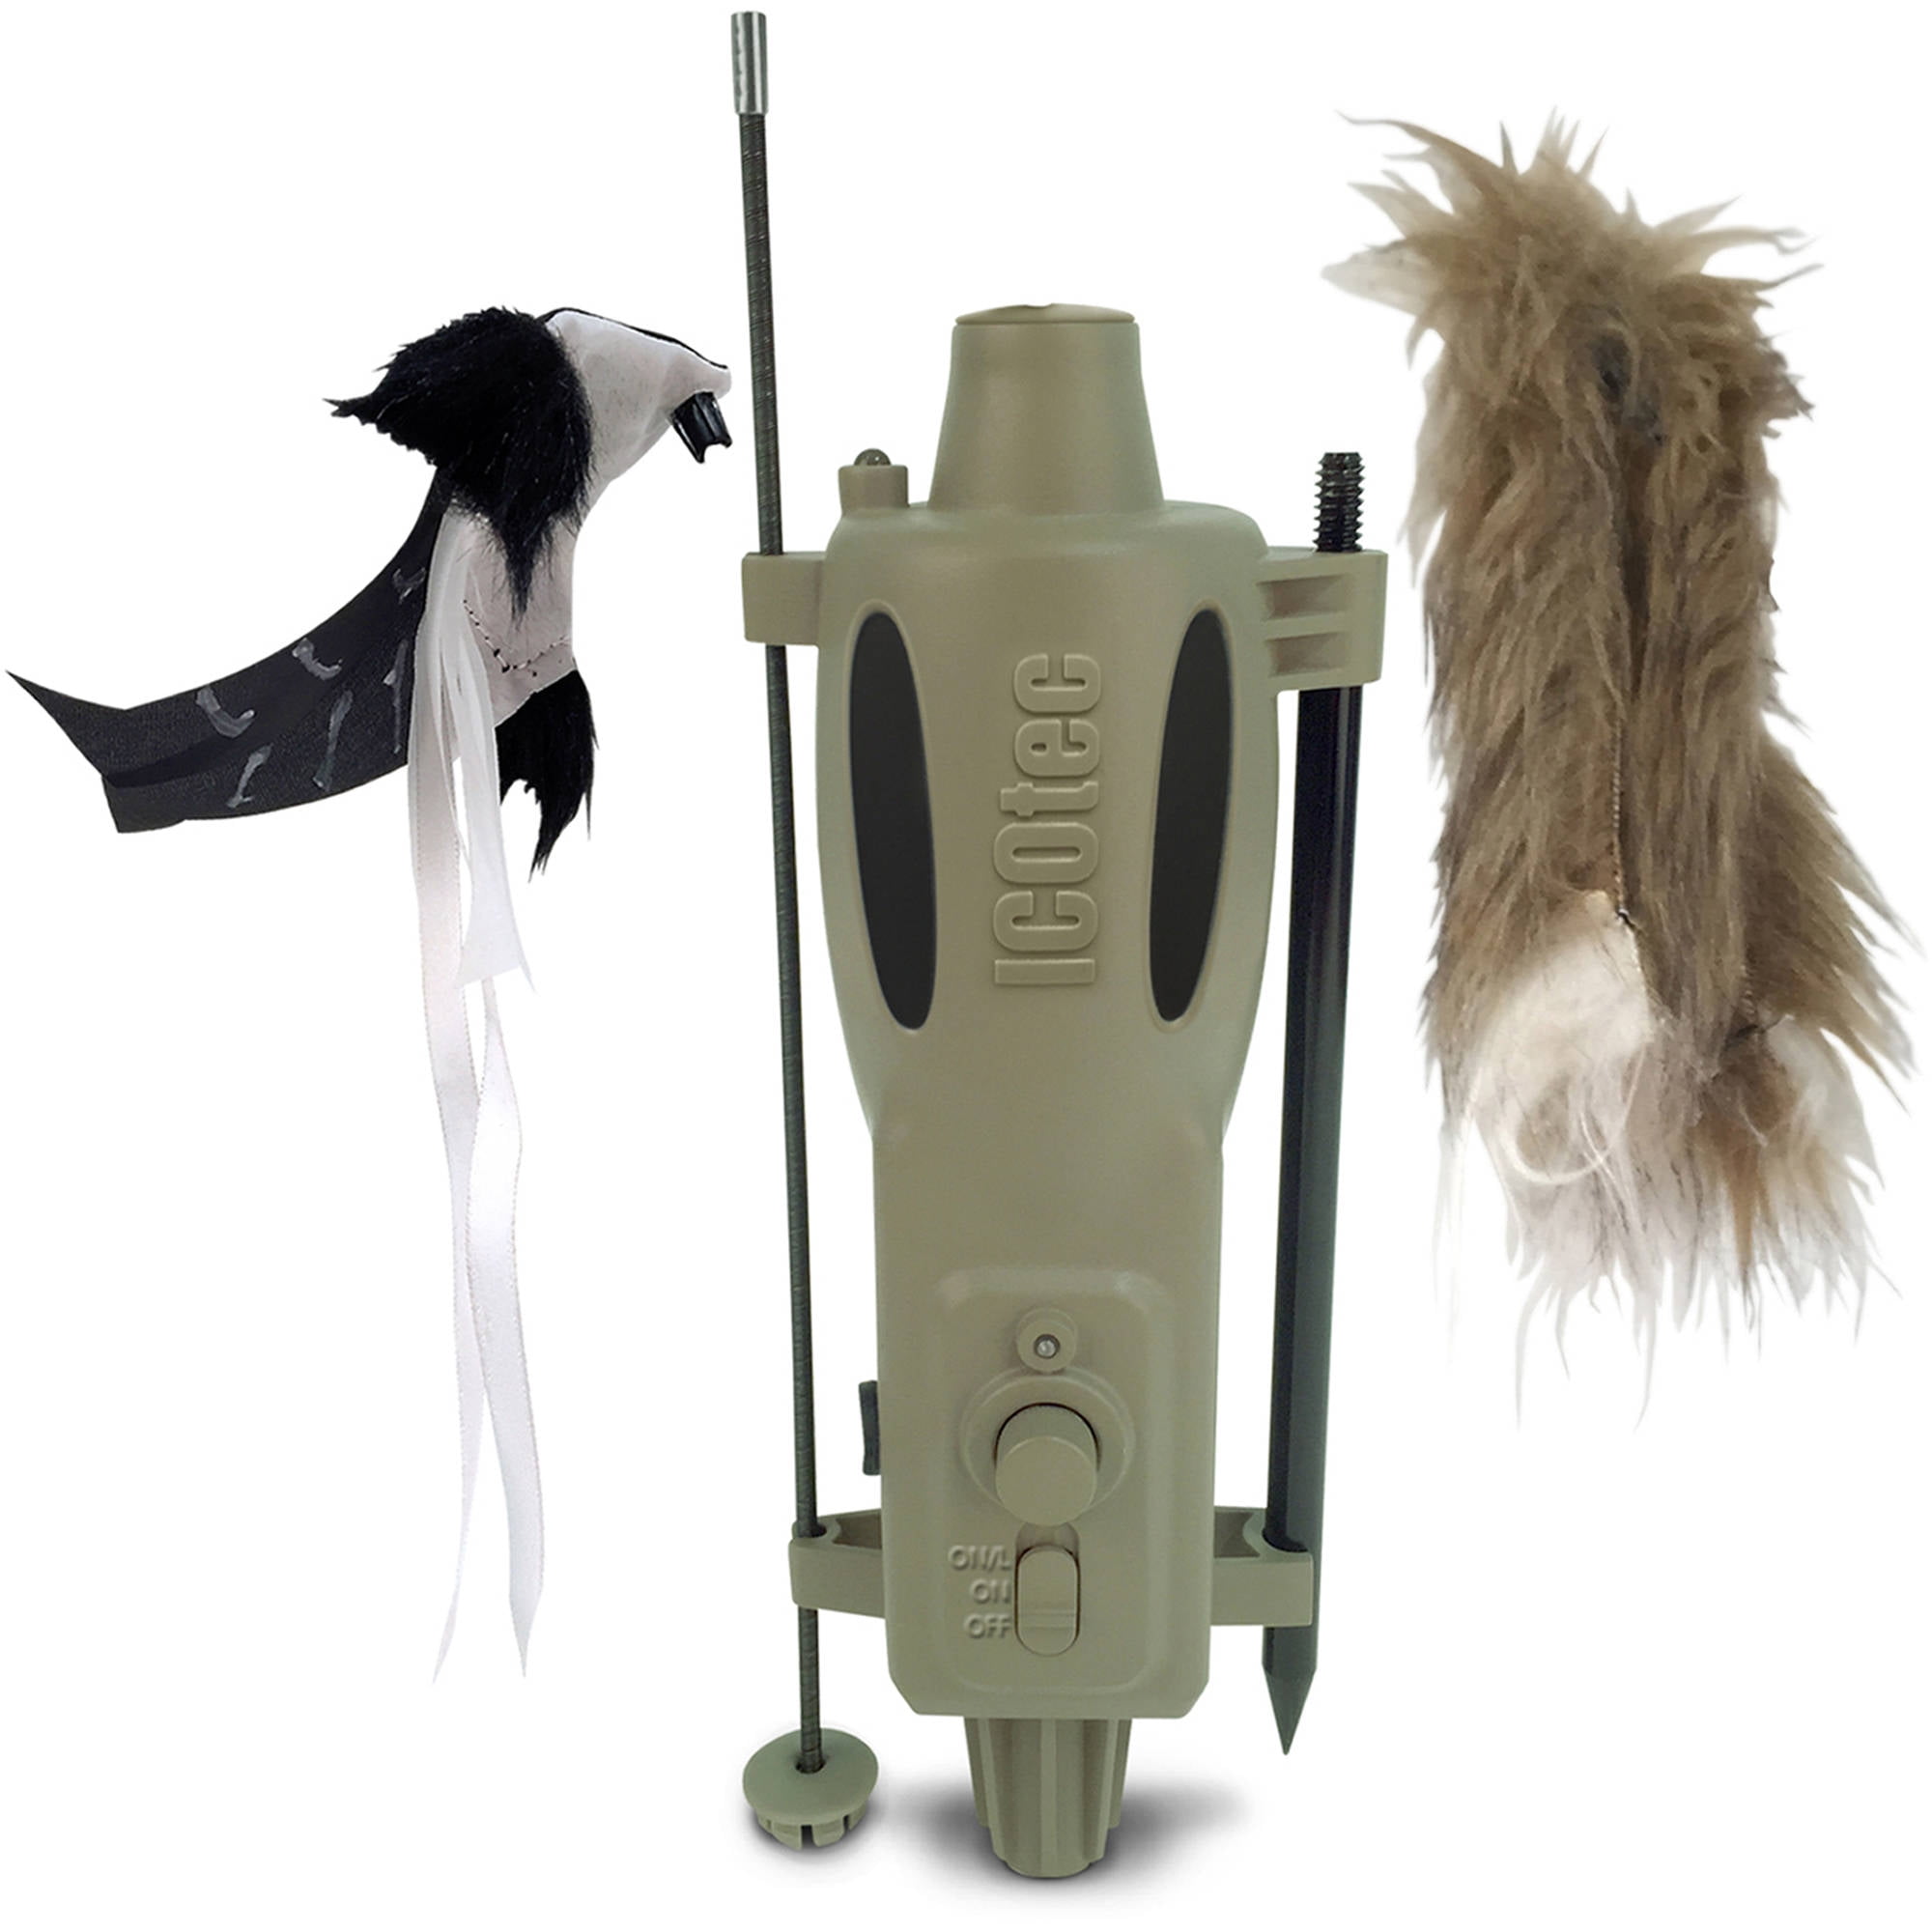 Predator Decoy Electronic Prey-Type Fur Critter Coyote Remote Callers With Sound 